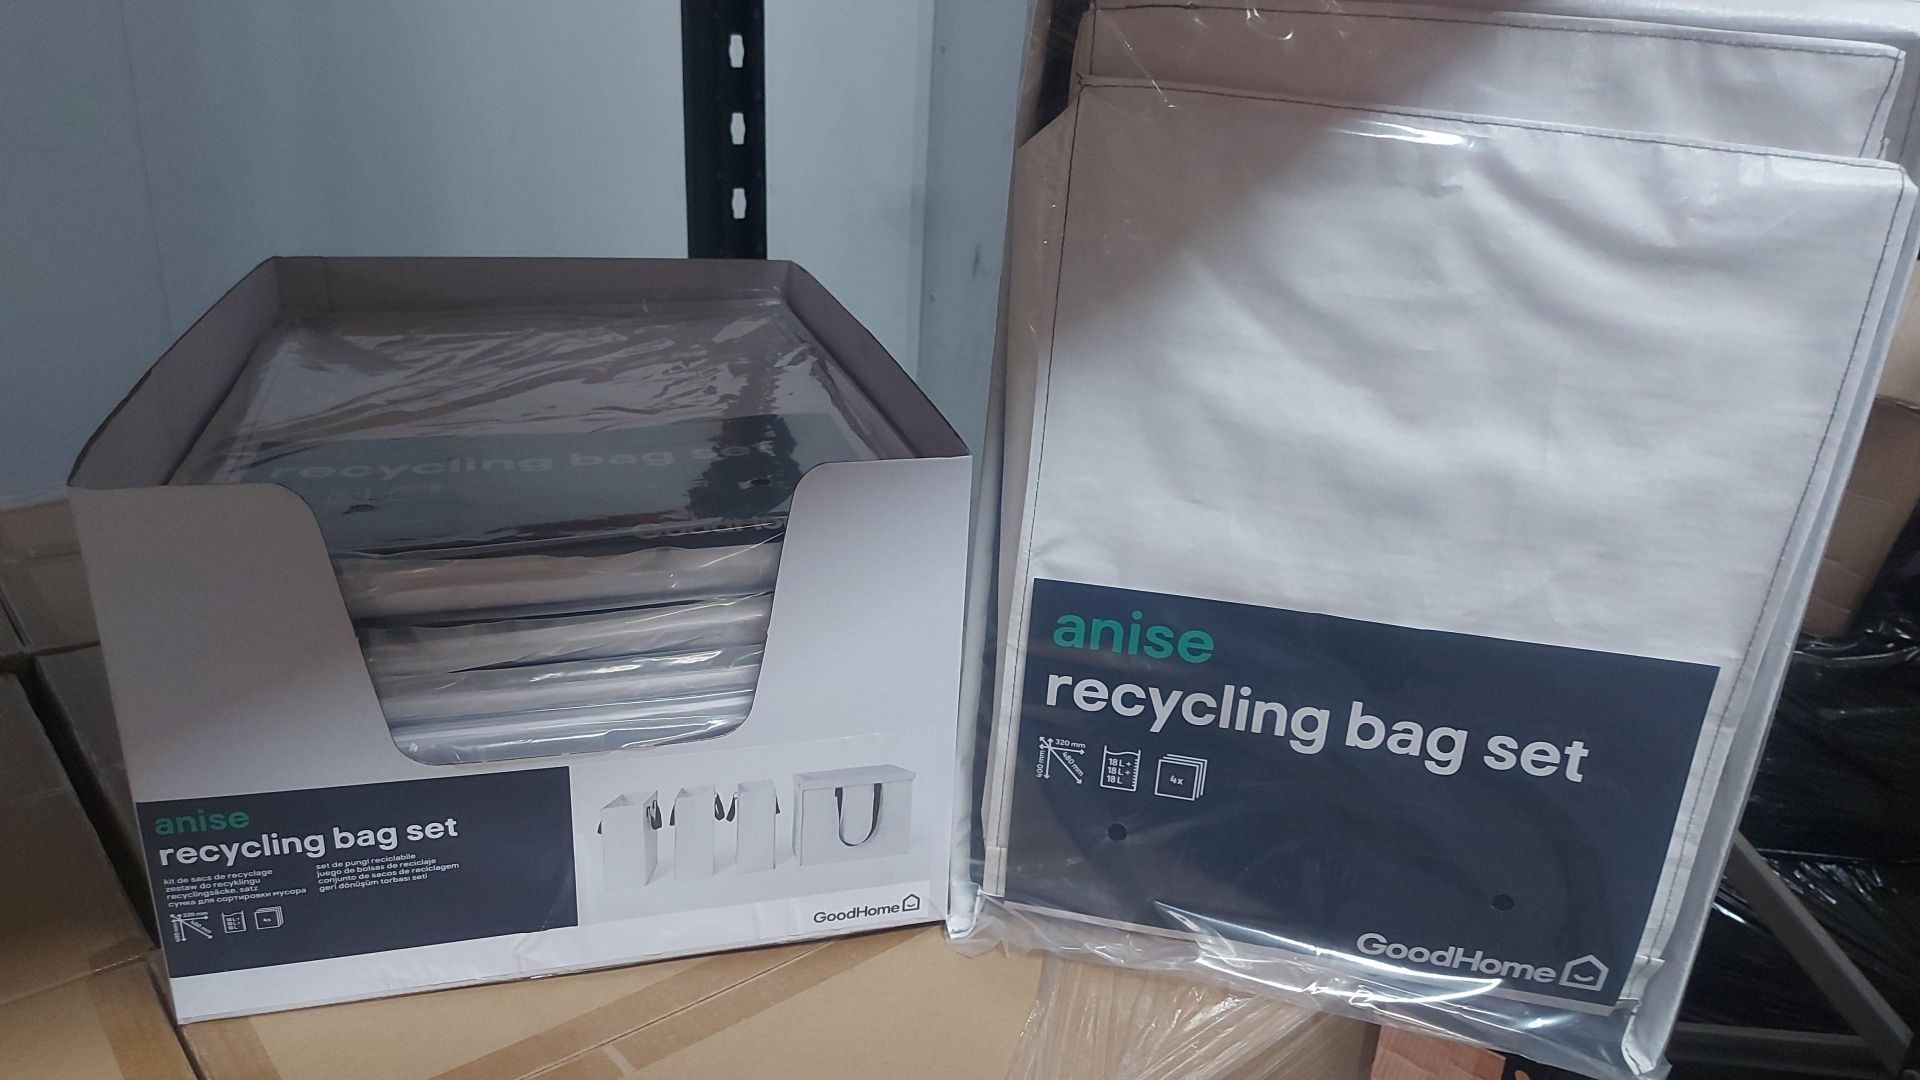 18 X NEW PACKAGED SETS OF 4 NISE RECYCLING BAG SETS. INCLUDES 3 X 18L HEAVY DUTY BAGS AND AN EXTRA